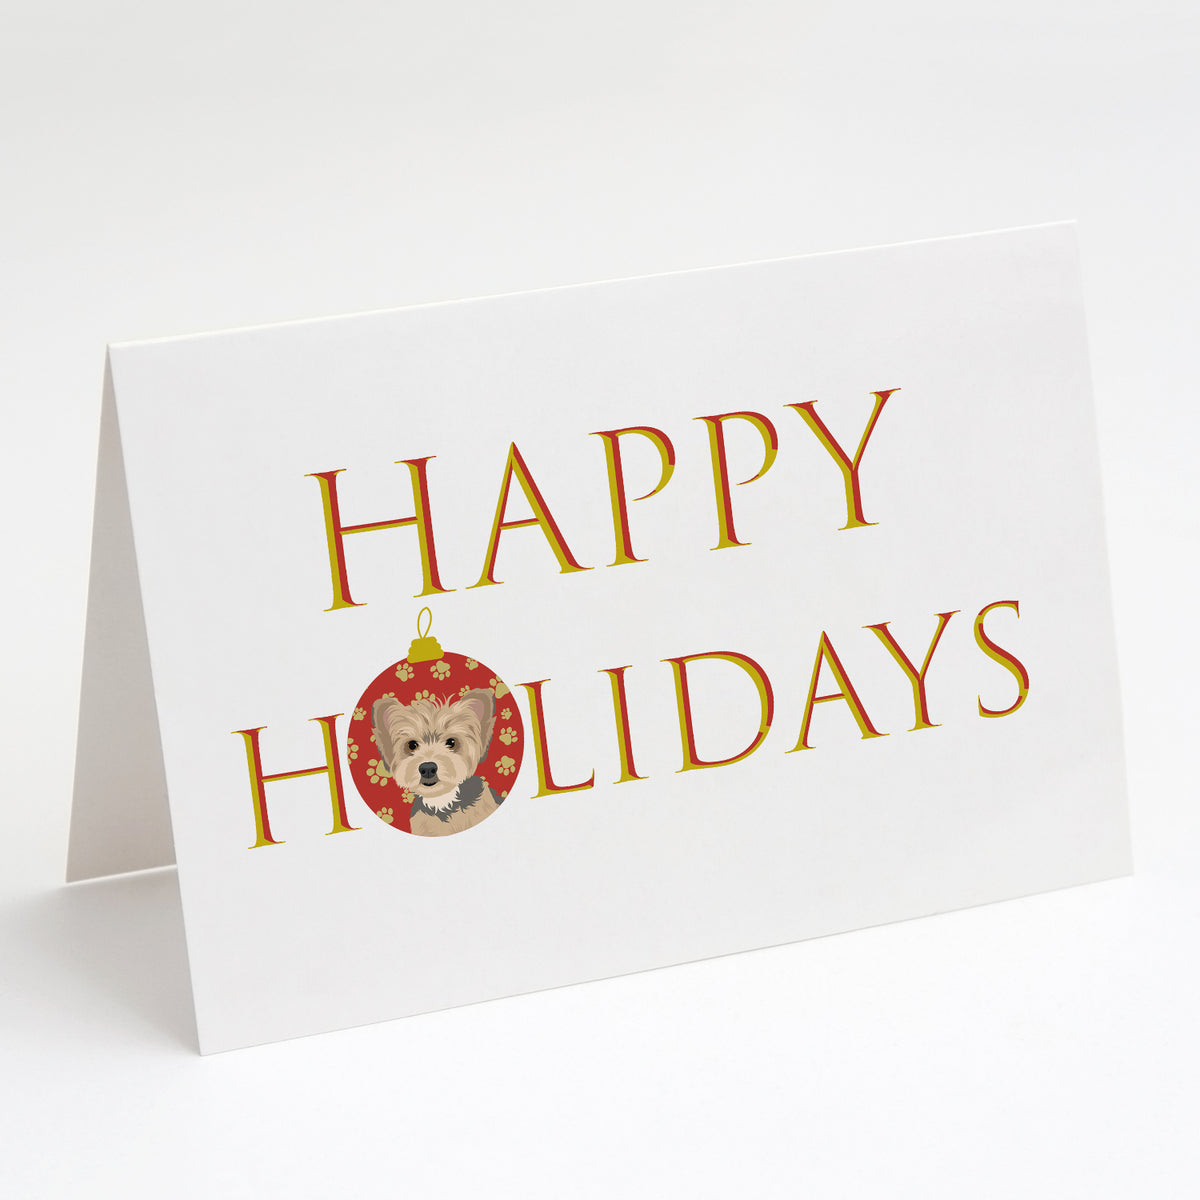 Buy this Yorkie Blue and Tan Puppy Happy Holidays Greeting Cards and Envelopes Pack of 8